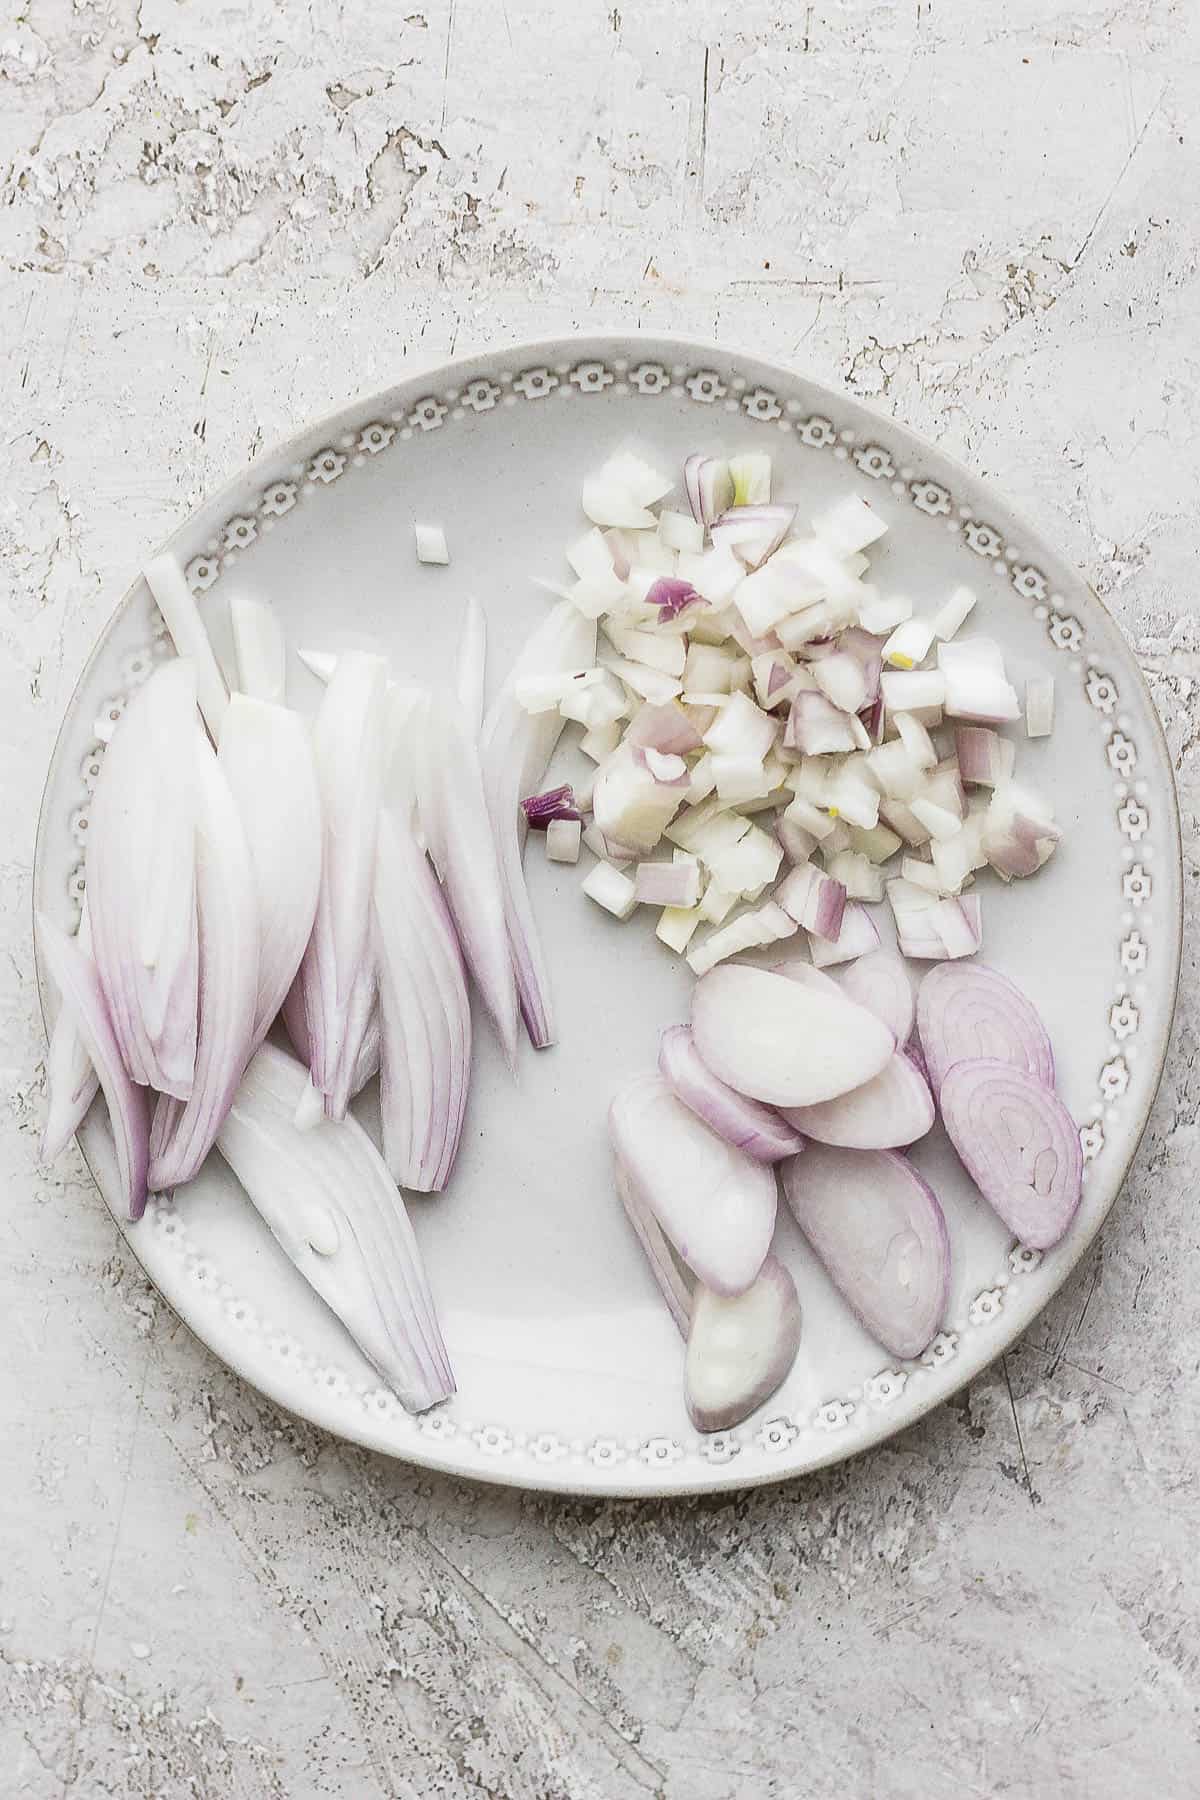 3 types of cuts for shallots on a white plate